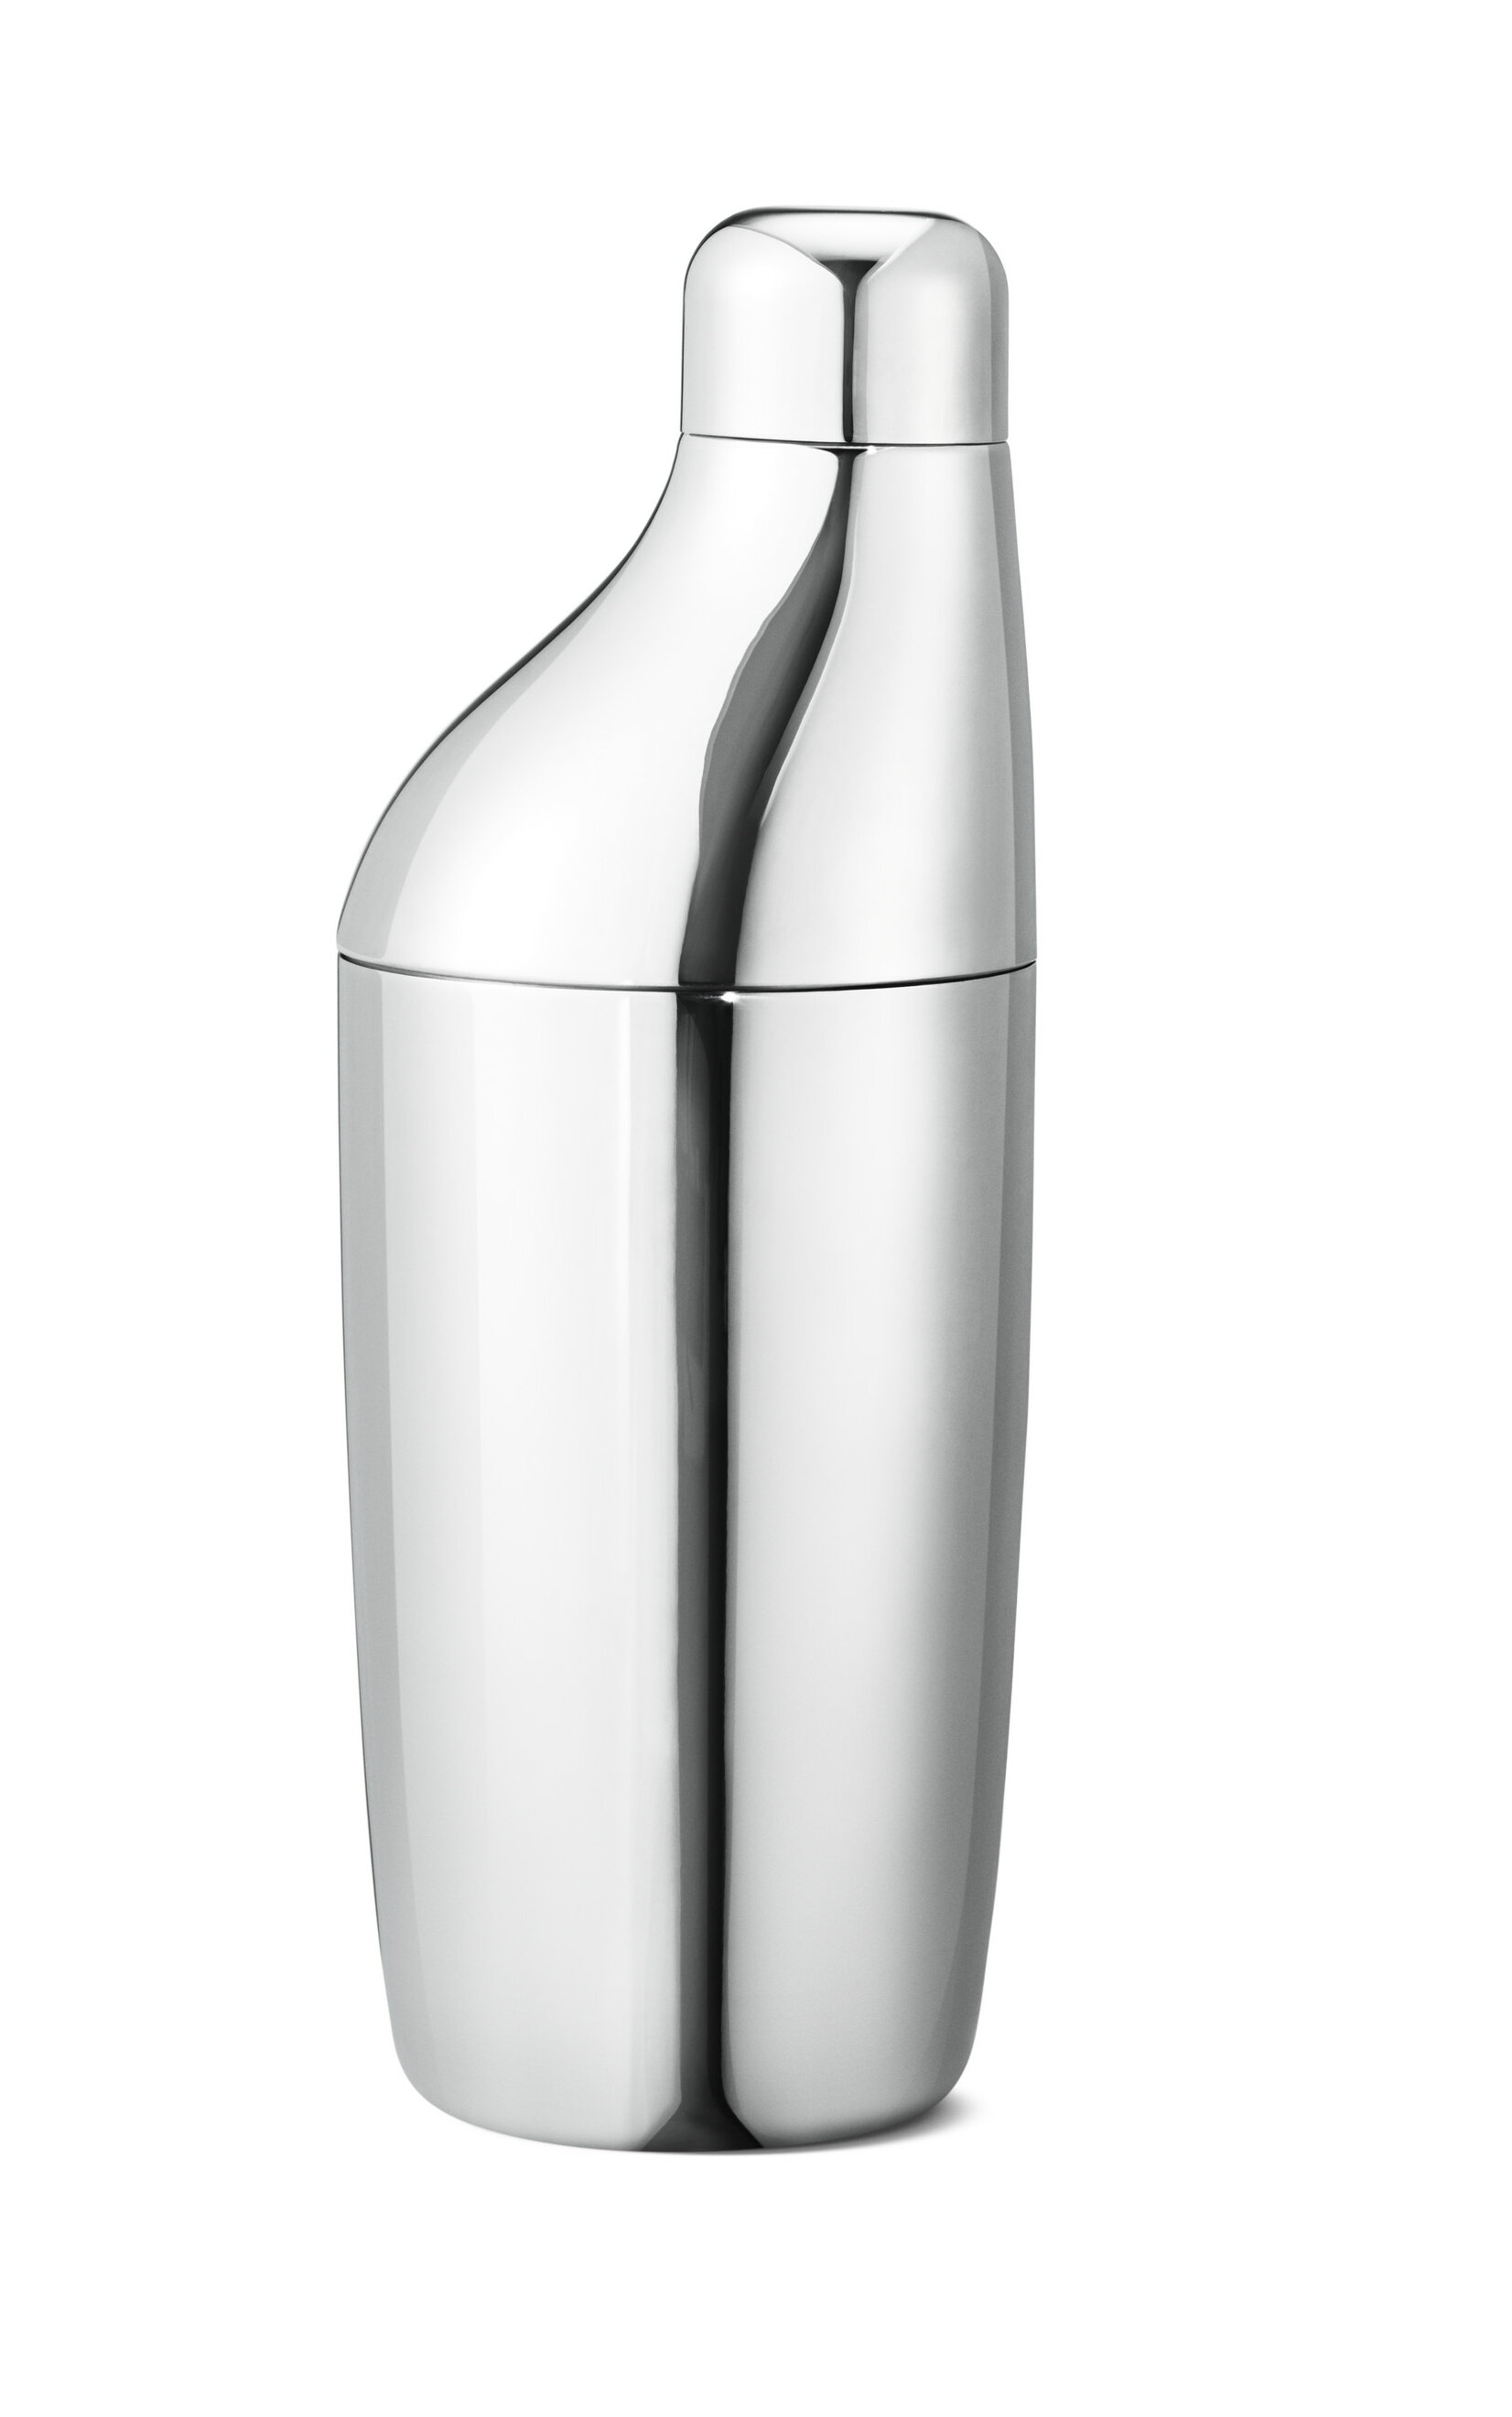 MacKenzie-Childs  Courtly Check 3260 Cocktail Shaker